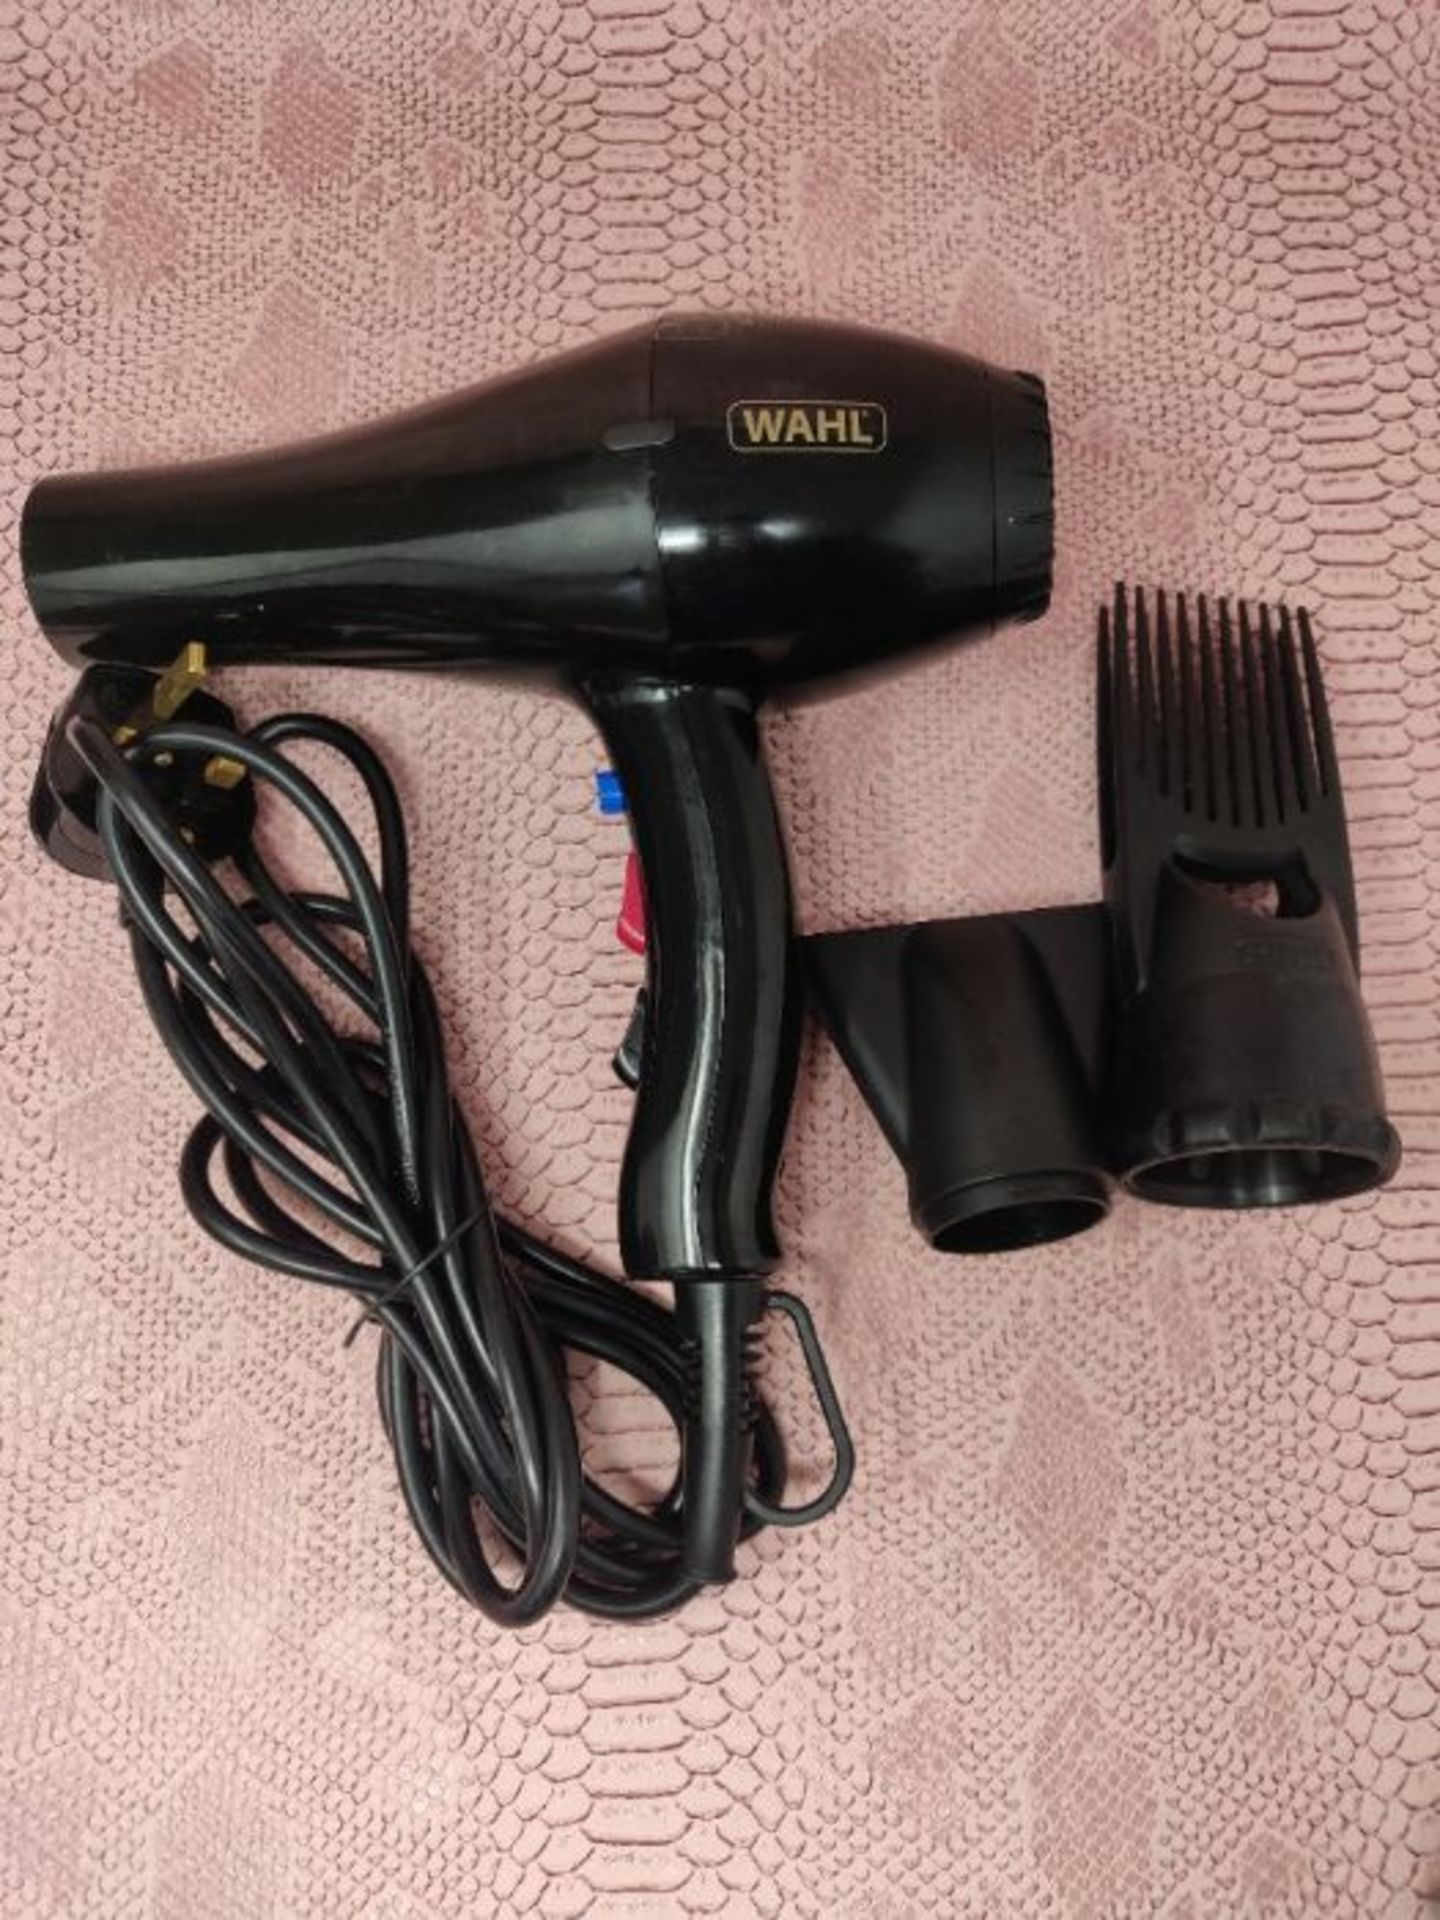 Wahl Hairdryer, PowerPik 5000, Dryer for Women, Hair Dryer with Pik Attachment, Afro H - Image 3 of 3